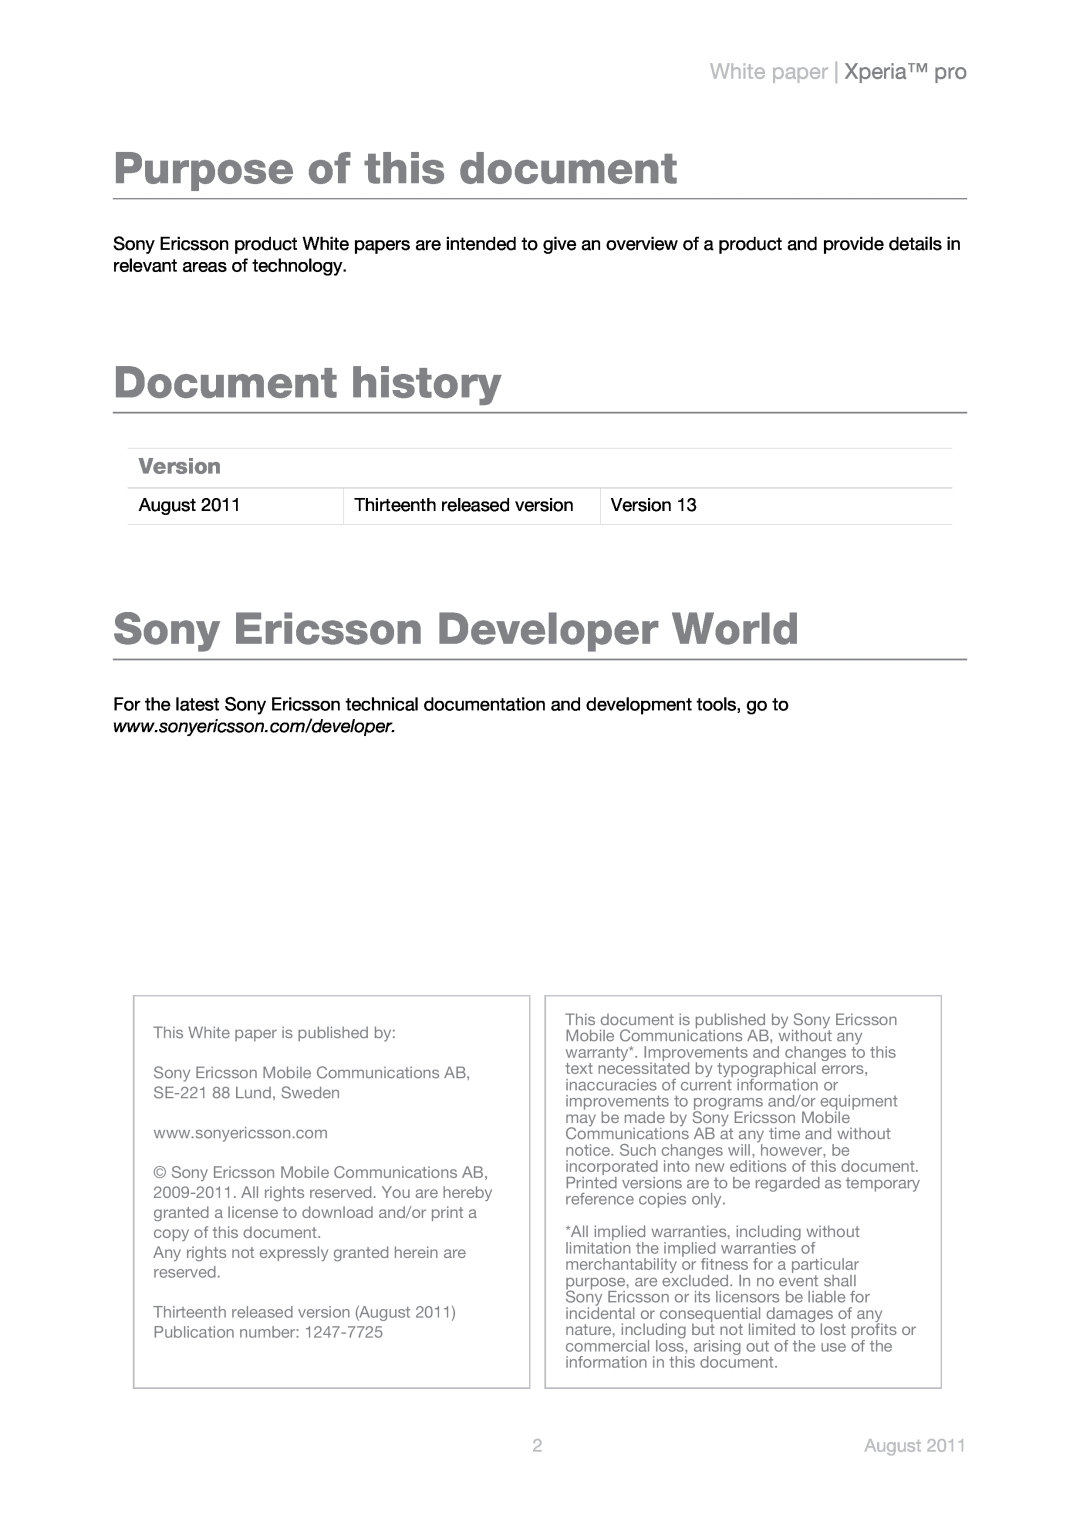 Sony Ericsson MK16a, MK16i manual White paper Xperia pro, Version, August, Purpose of this document, Document history 